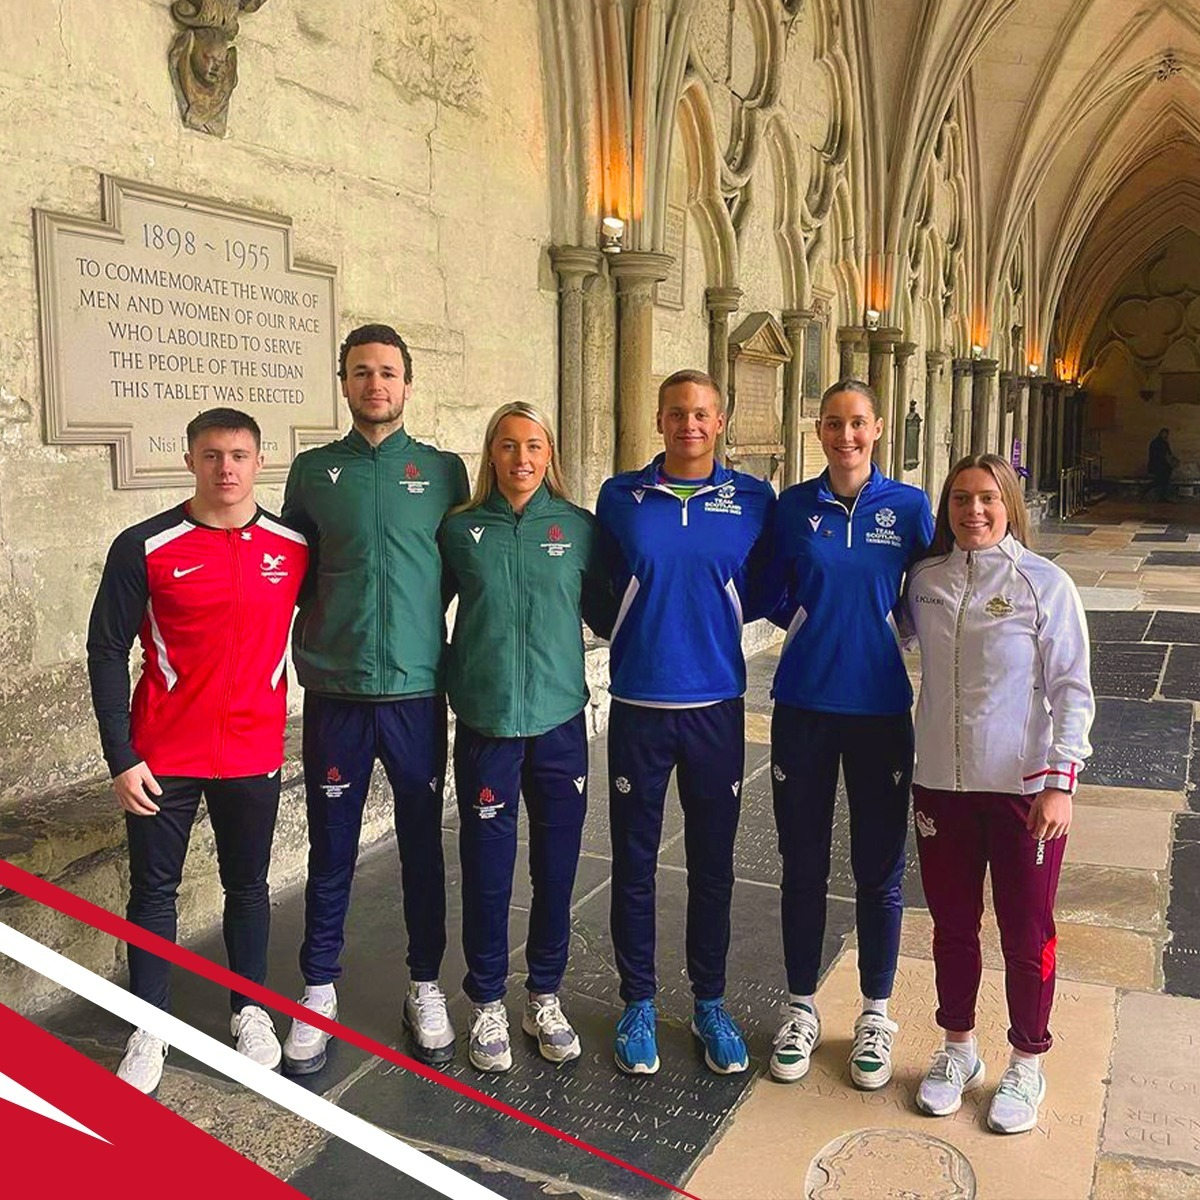 Commonwealth Day vibes 🙌 We're proud of Birmingham 2022 rugby sevens player @Aliciamaude_, who represented us at yesterday's celebrations at Westminster Abbey!